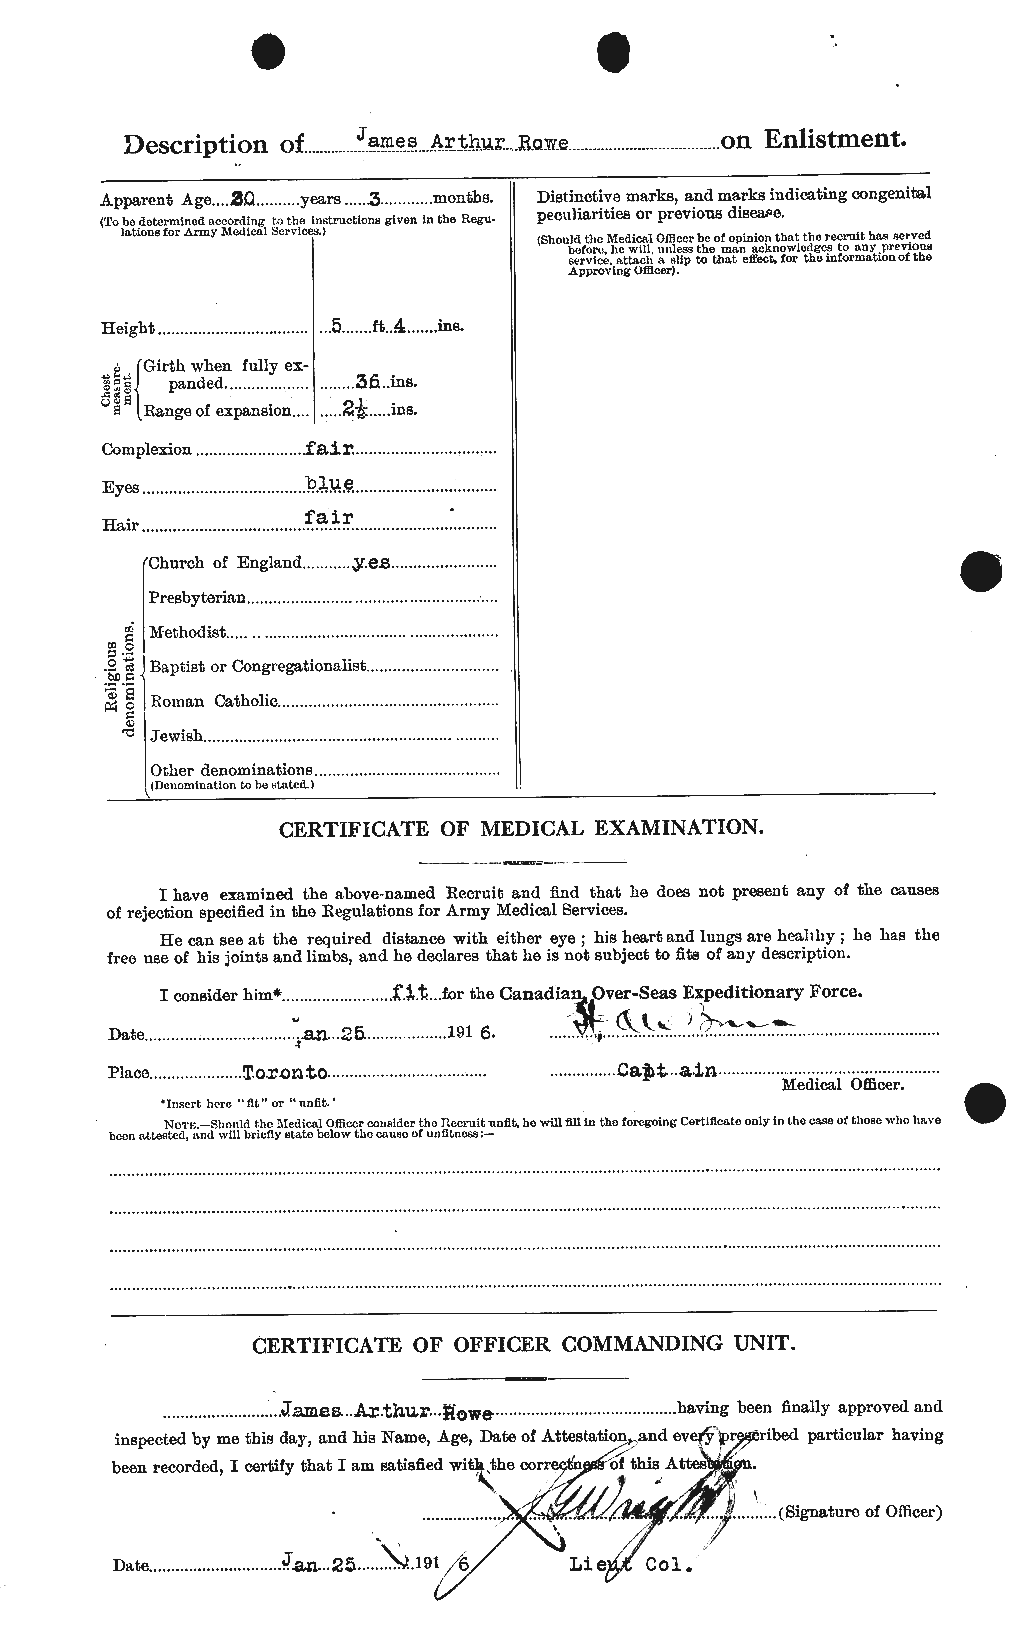 Personnel Records of the First World War - CEF 615913b